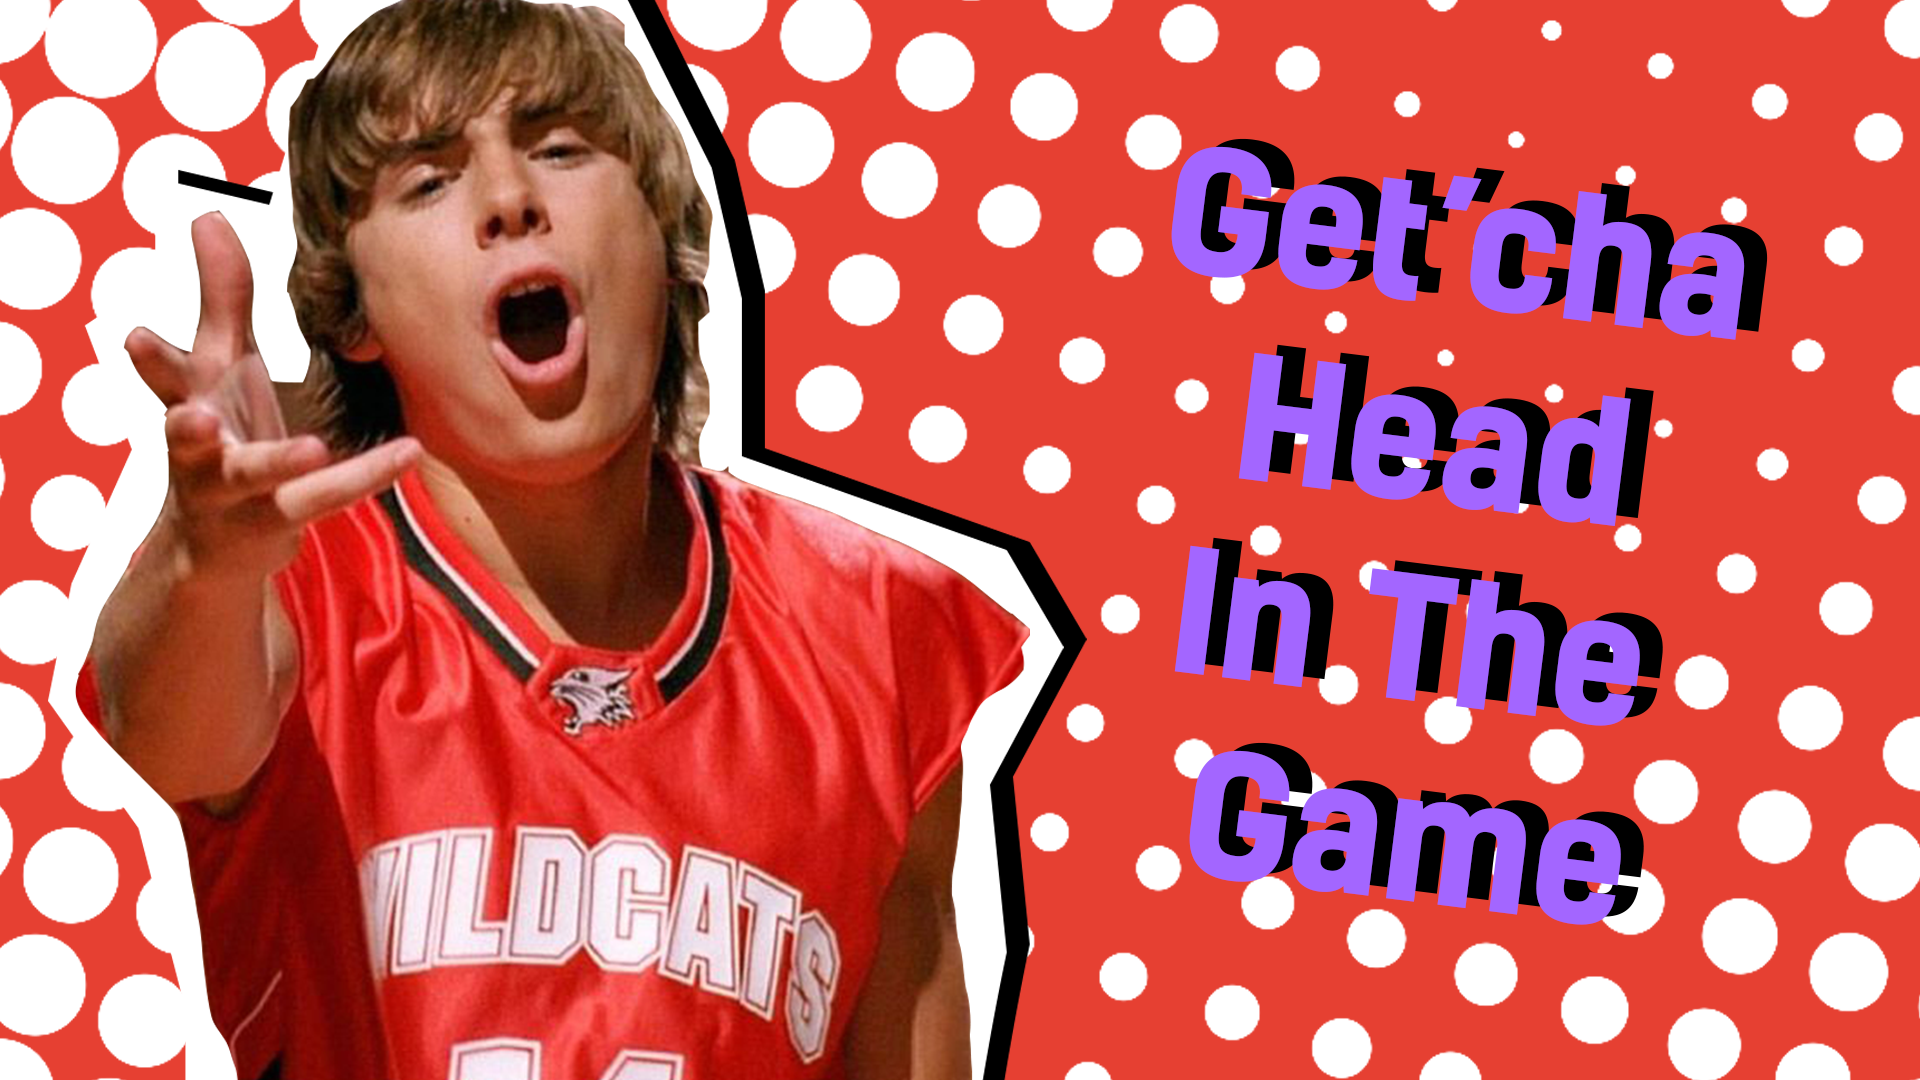 Get'cha head in the game result thumbnail